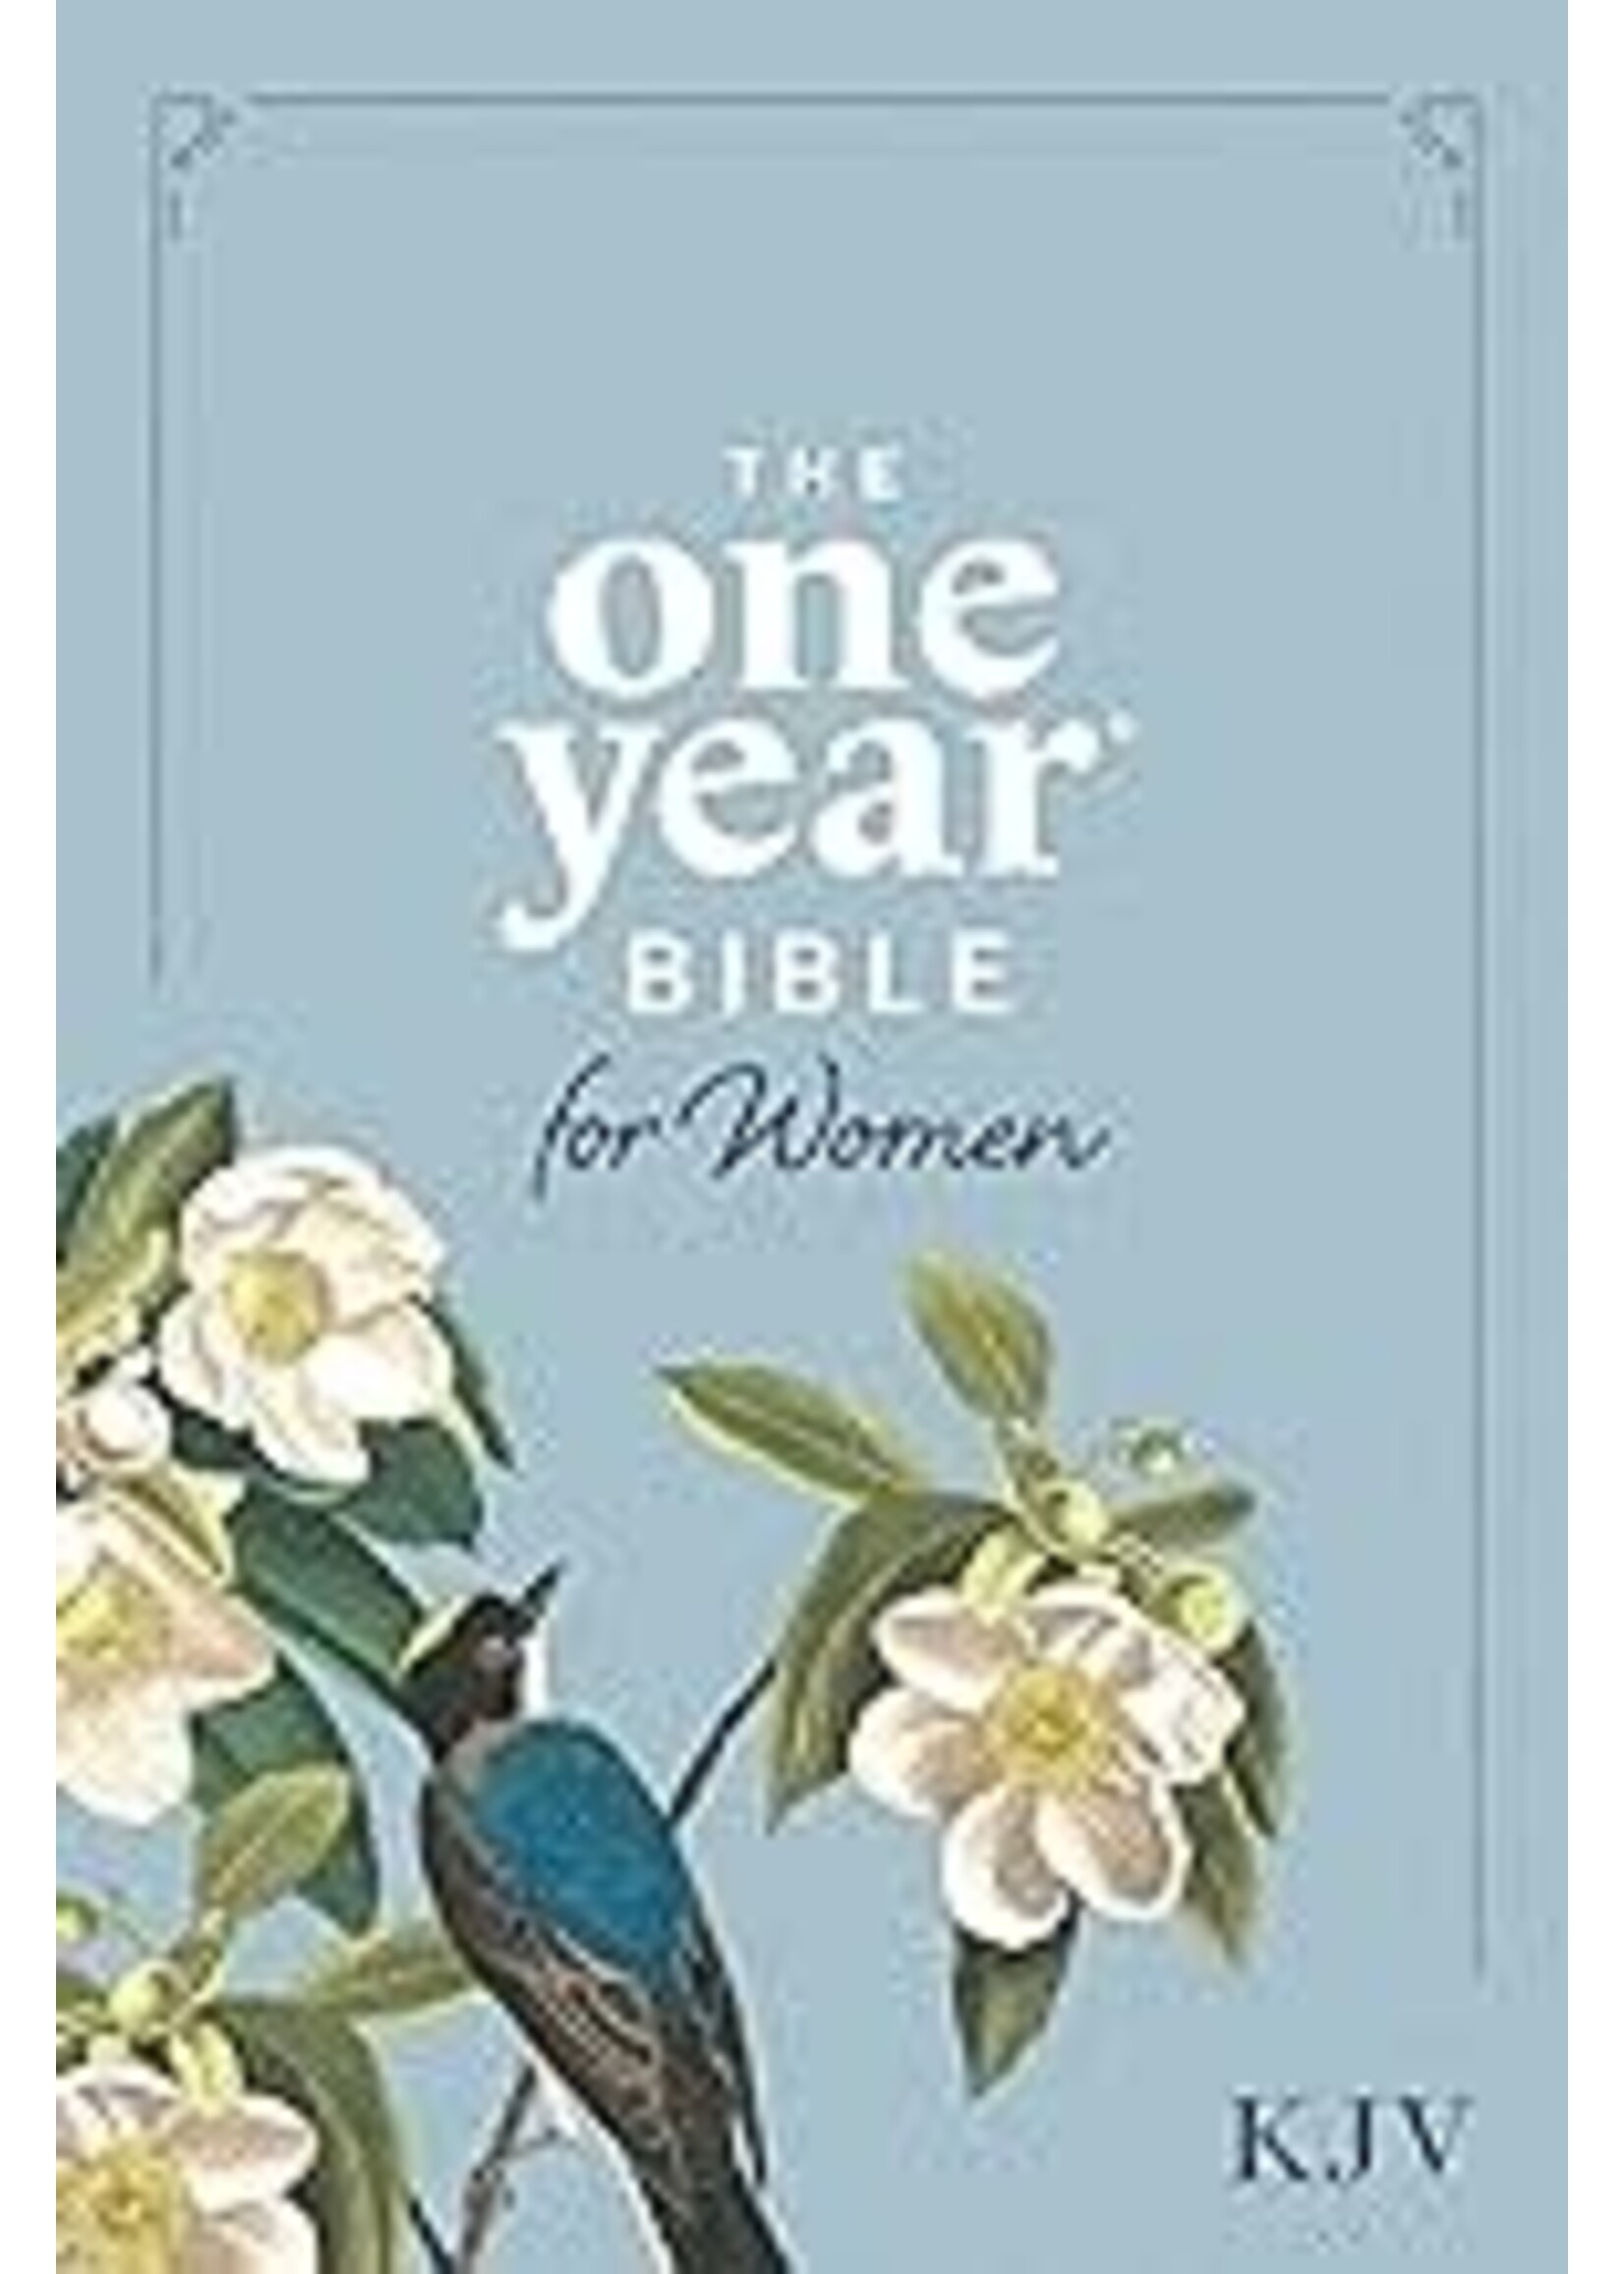 KJV The One Year Bible for Women-Hardcover